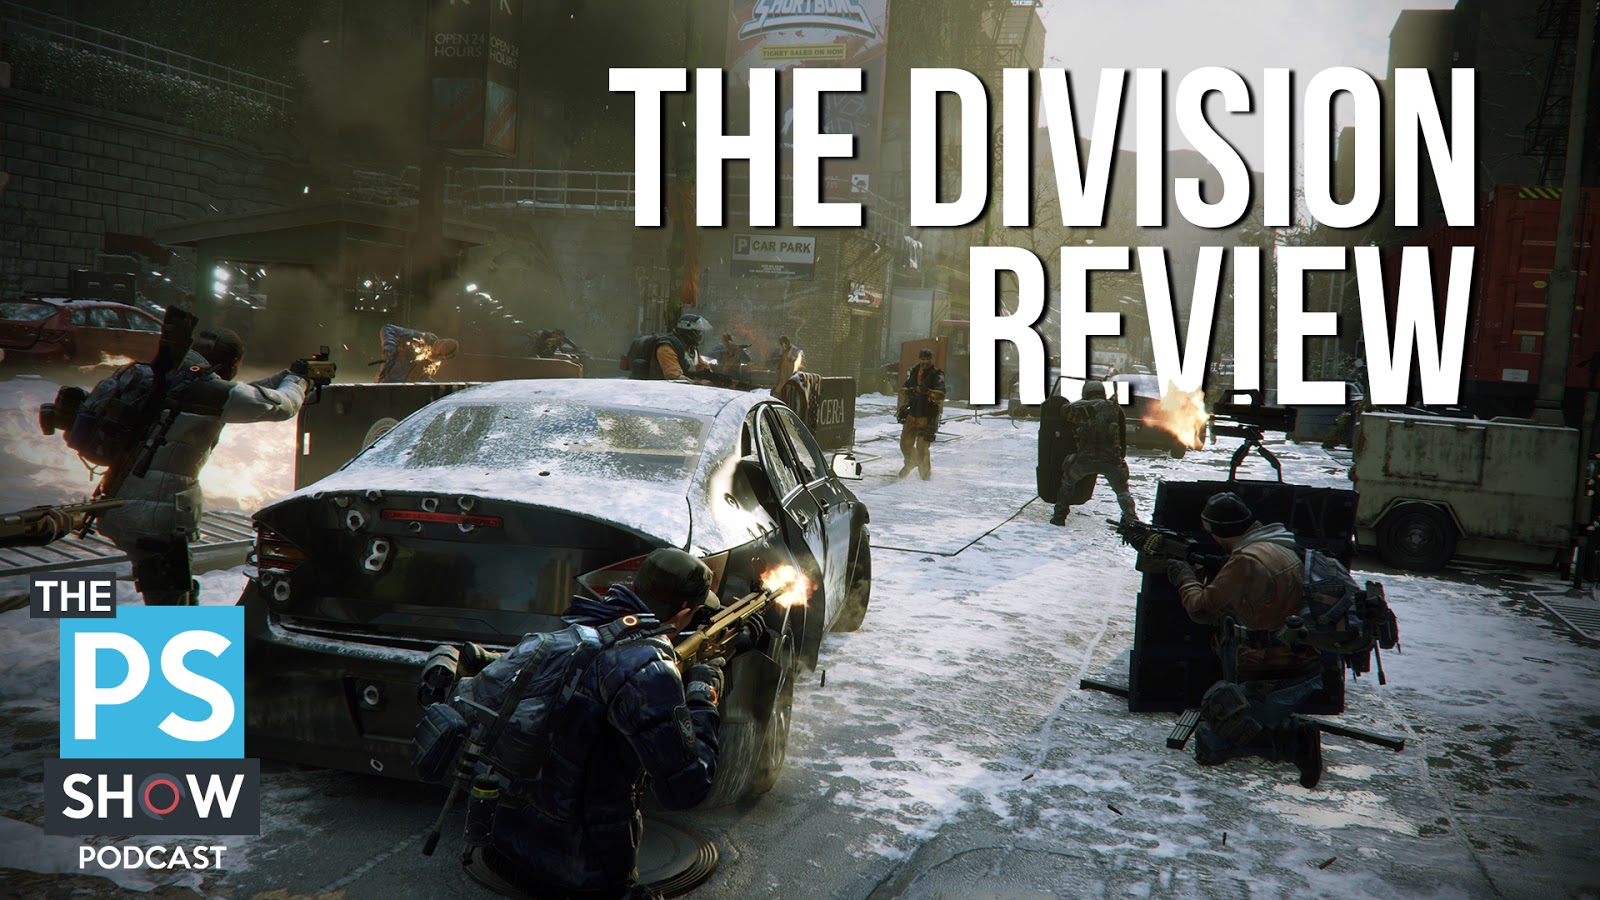 The division ps4. The Division геймплей. Дивижн ps4. Дивизион ps4.